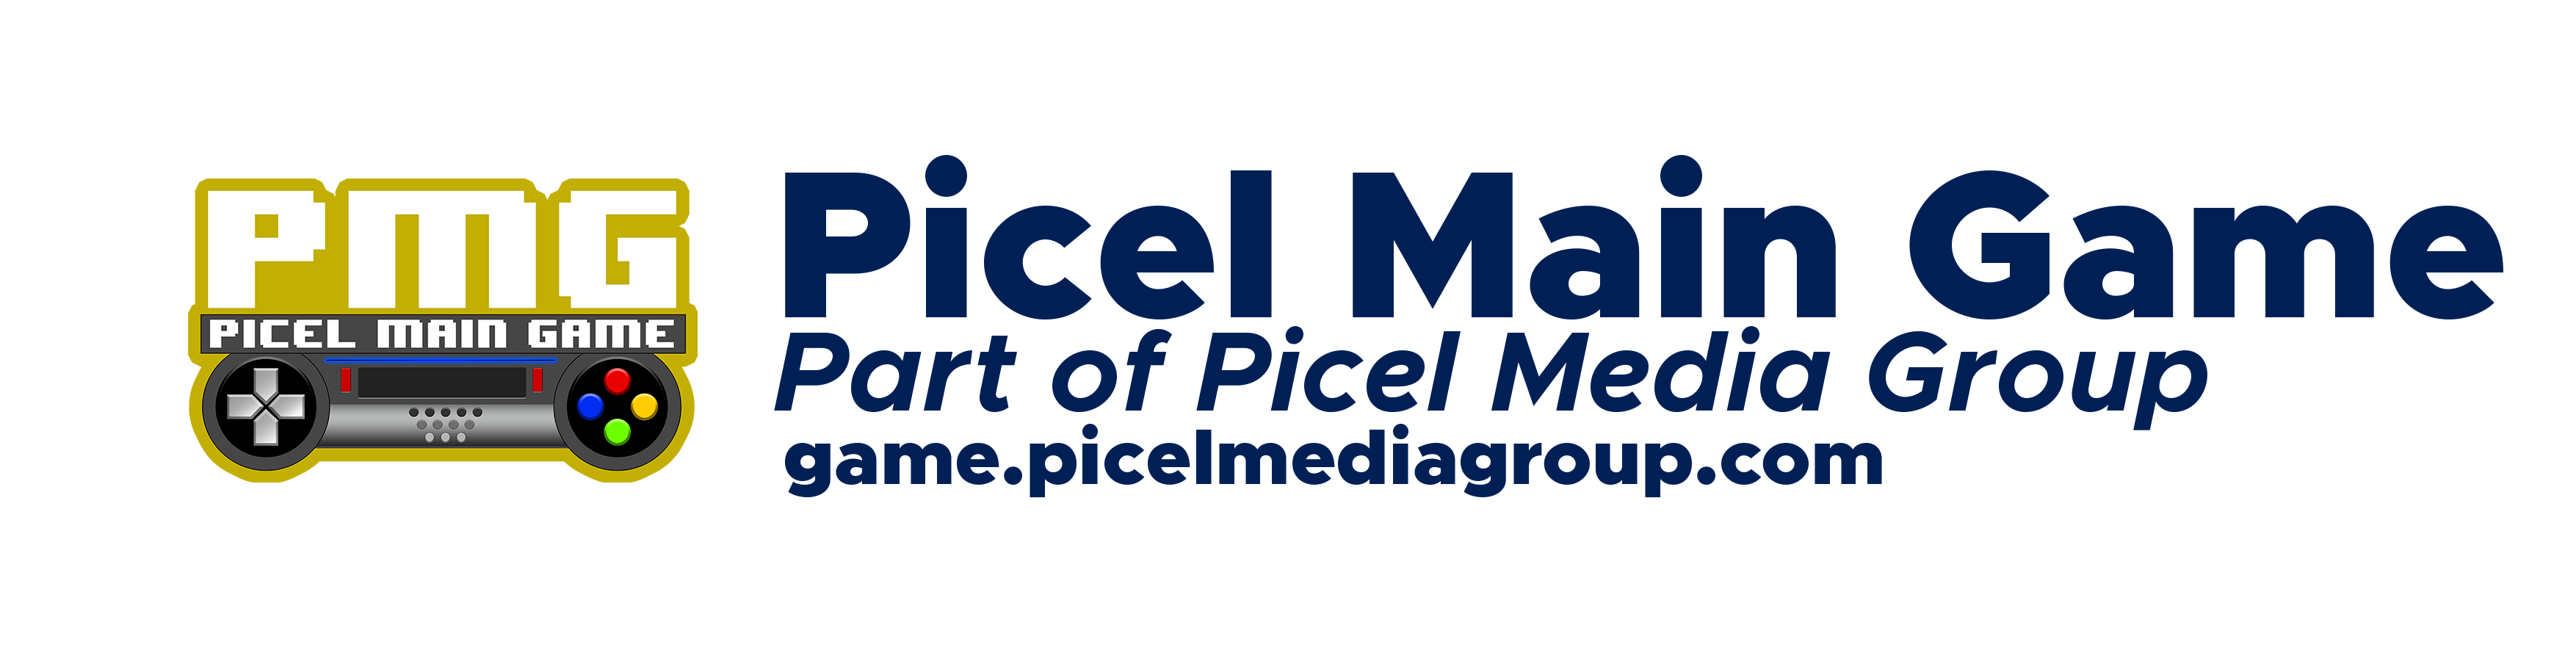 Picel Main Game - Indonesian Game Reviewer